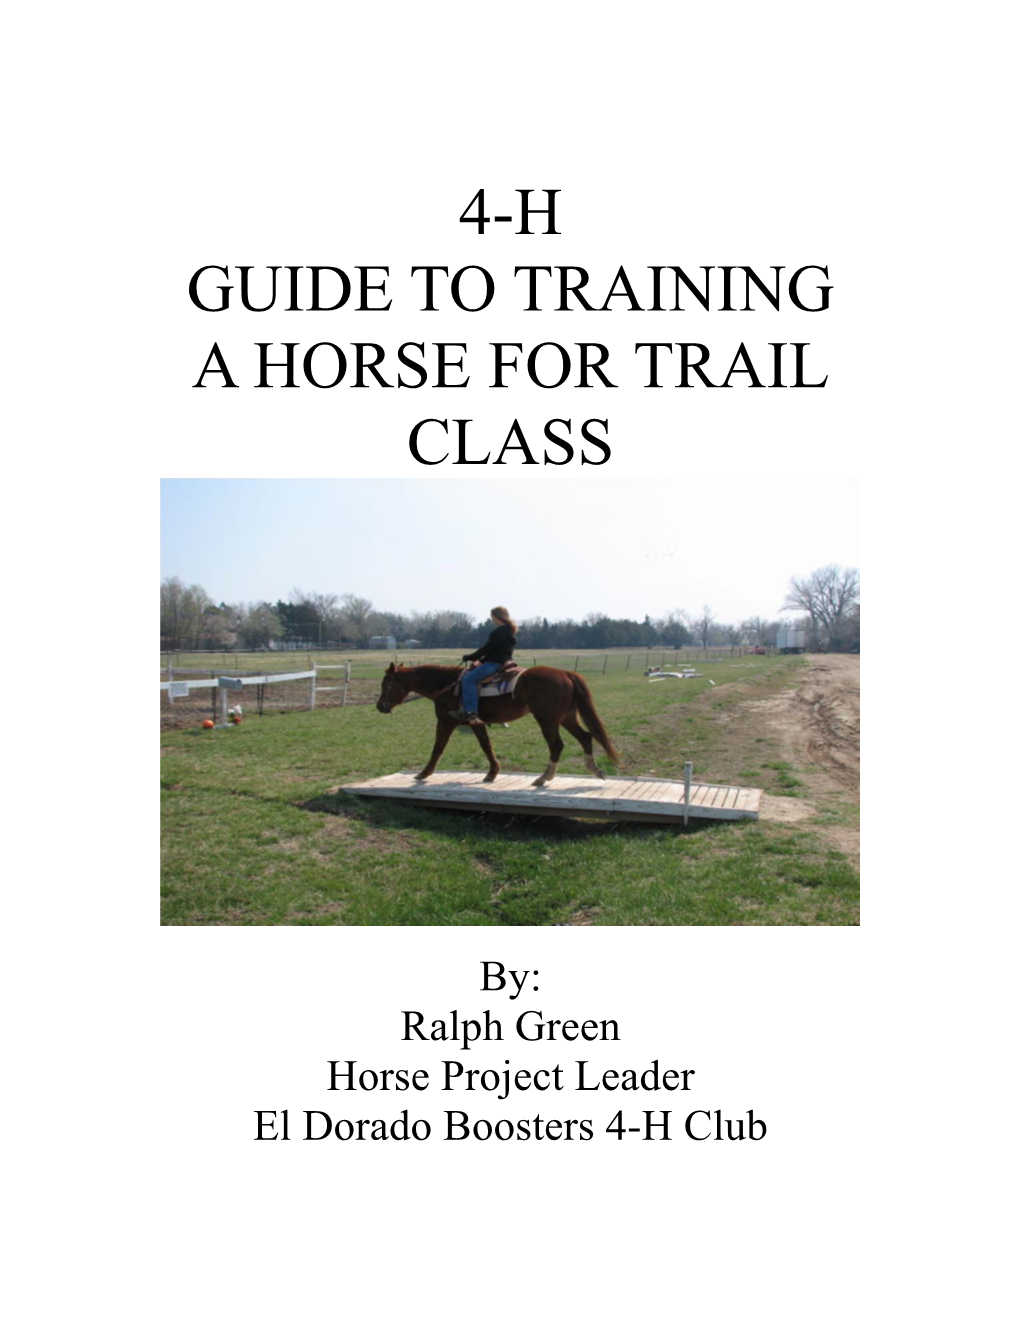 4-H Guide to Training a Horse for Trail Class